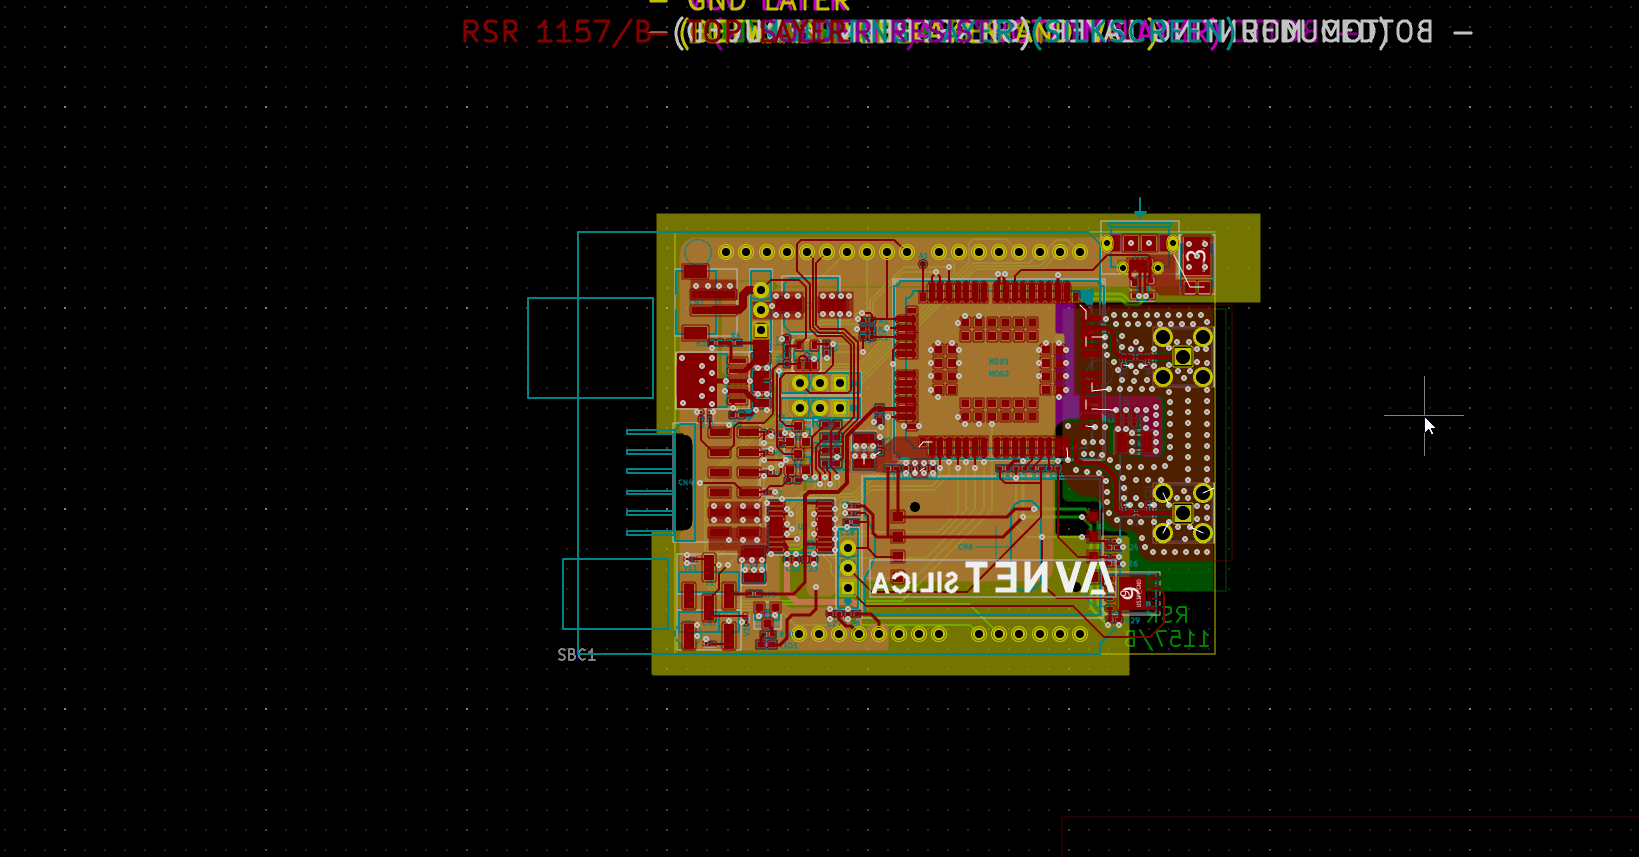 Fully imported PCB shown in Pcbnew